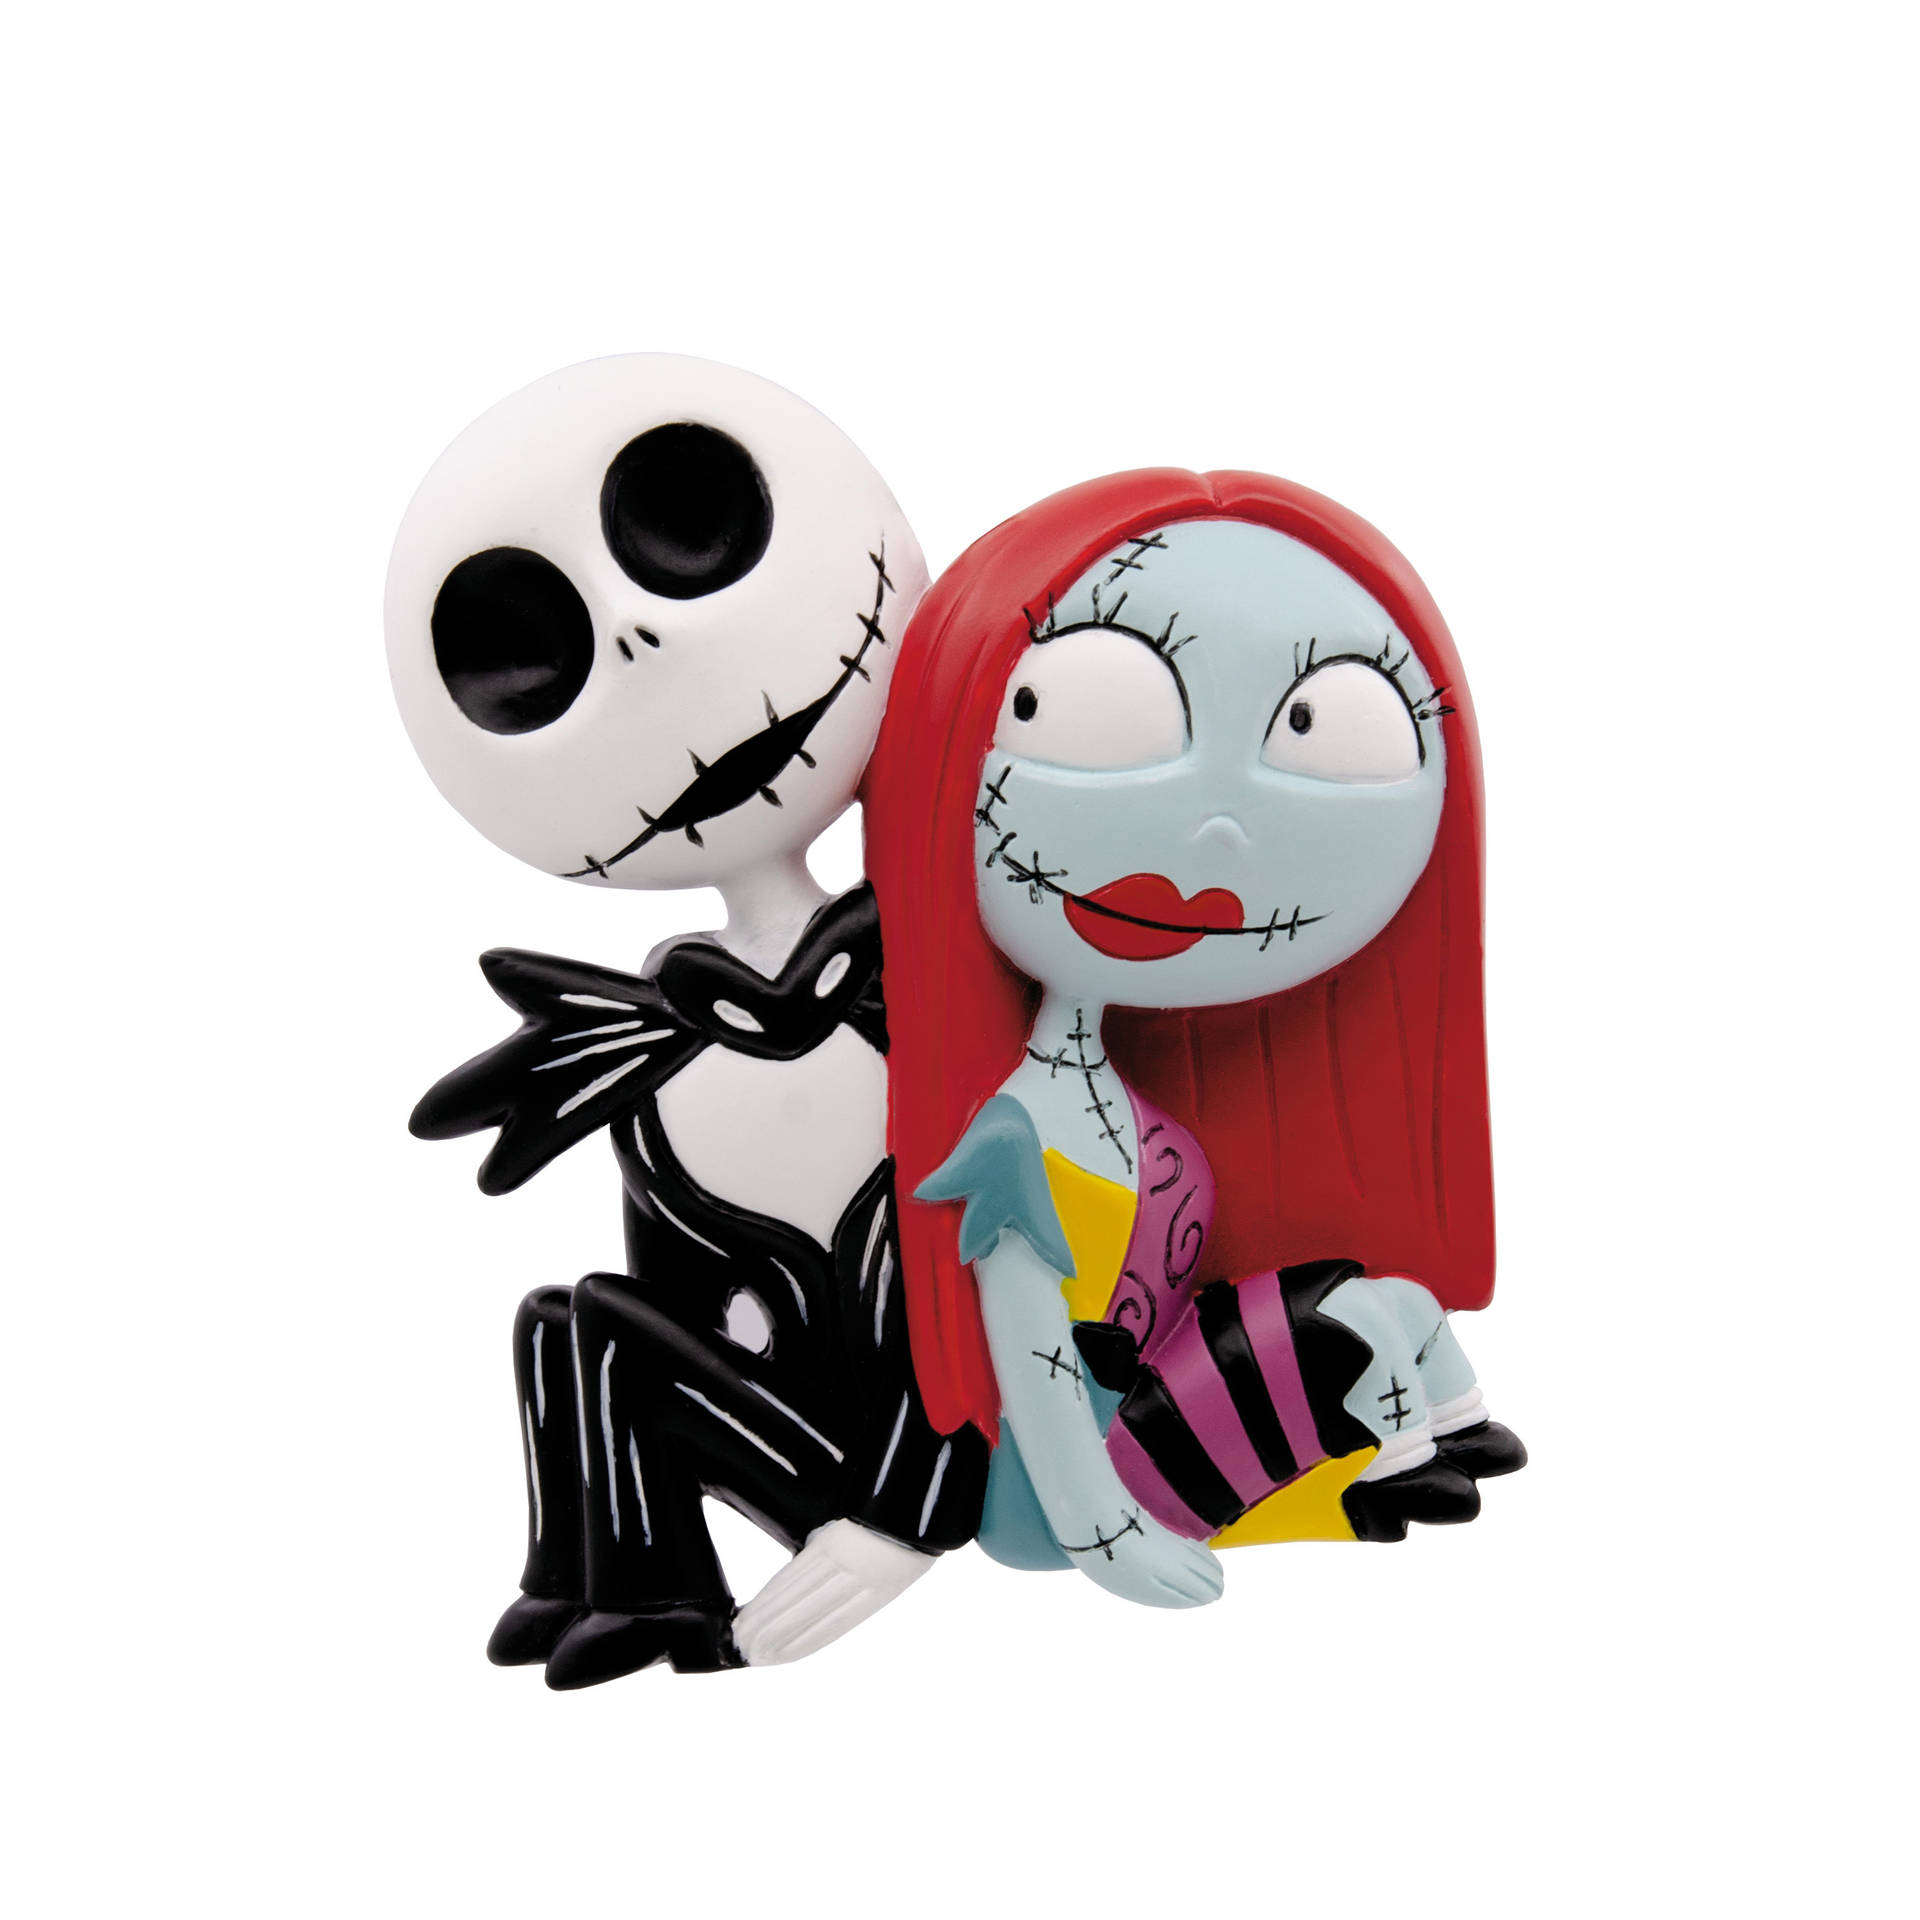 Jack And Sally Ornament Wallpaper